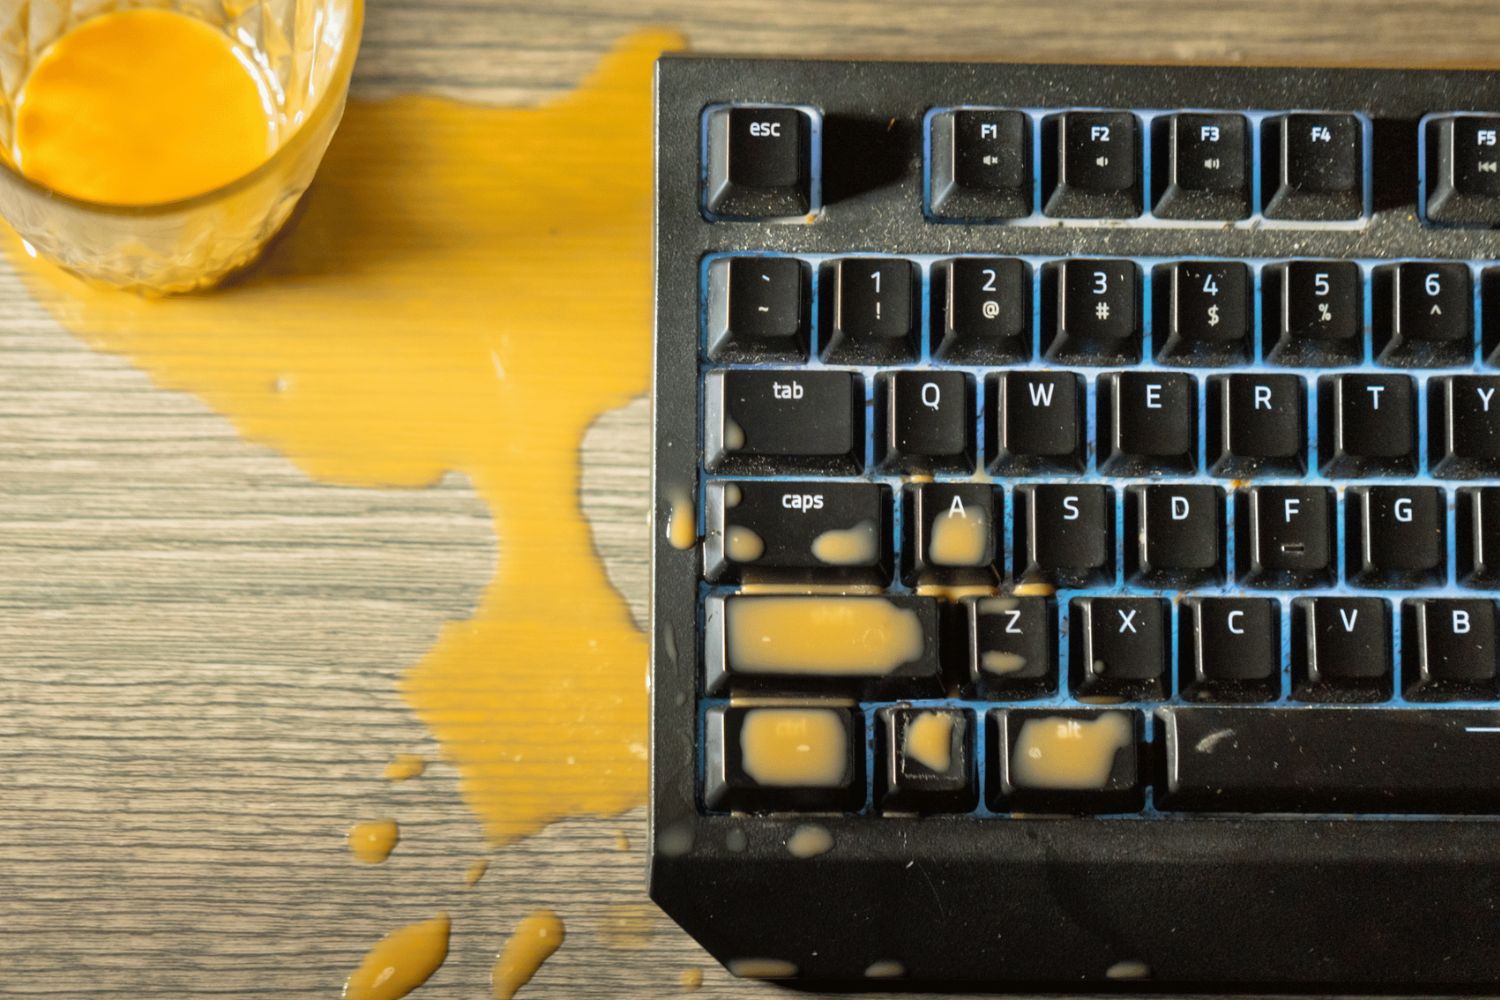 How To Clean A Mechanical Keyboard After A Spill